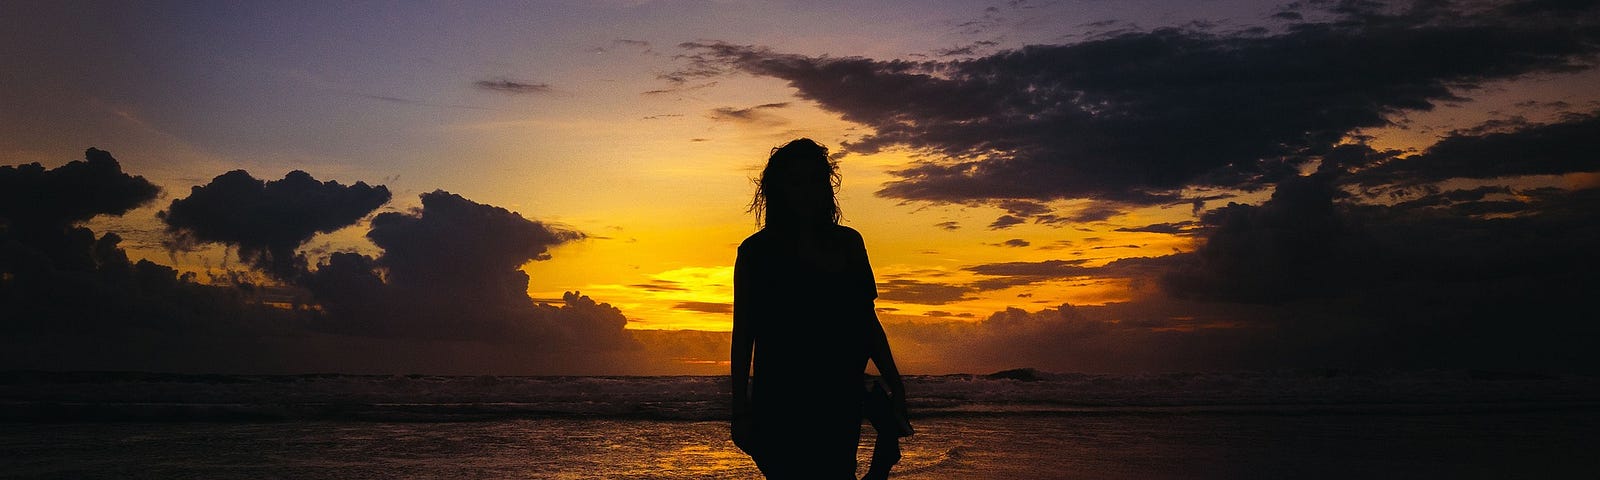 A silhouette of someone wading in shallow water with the sunset behind them.